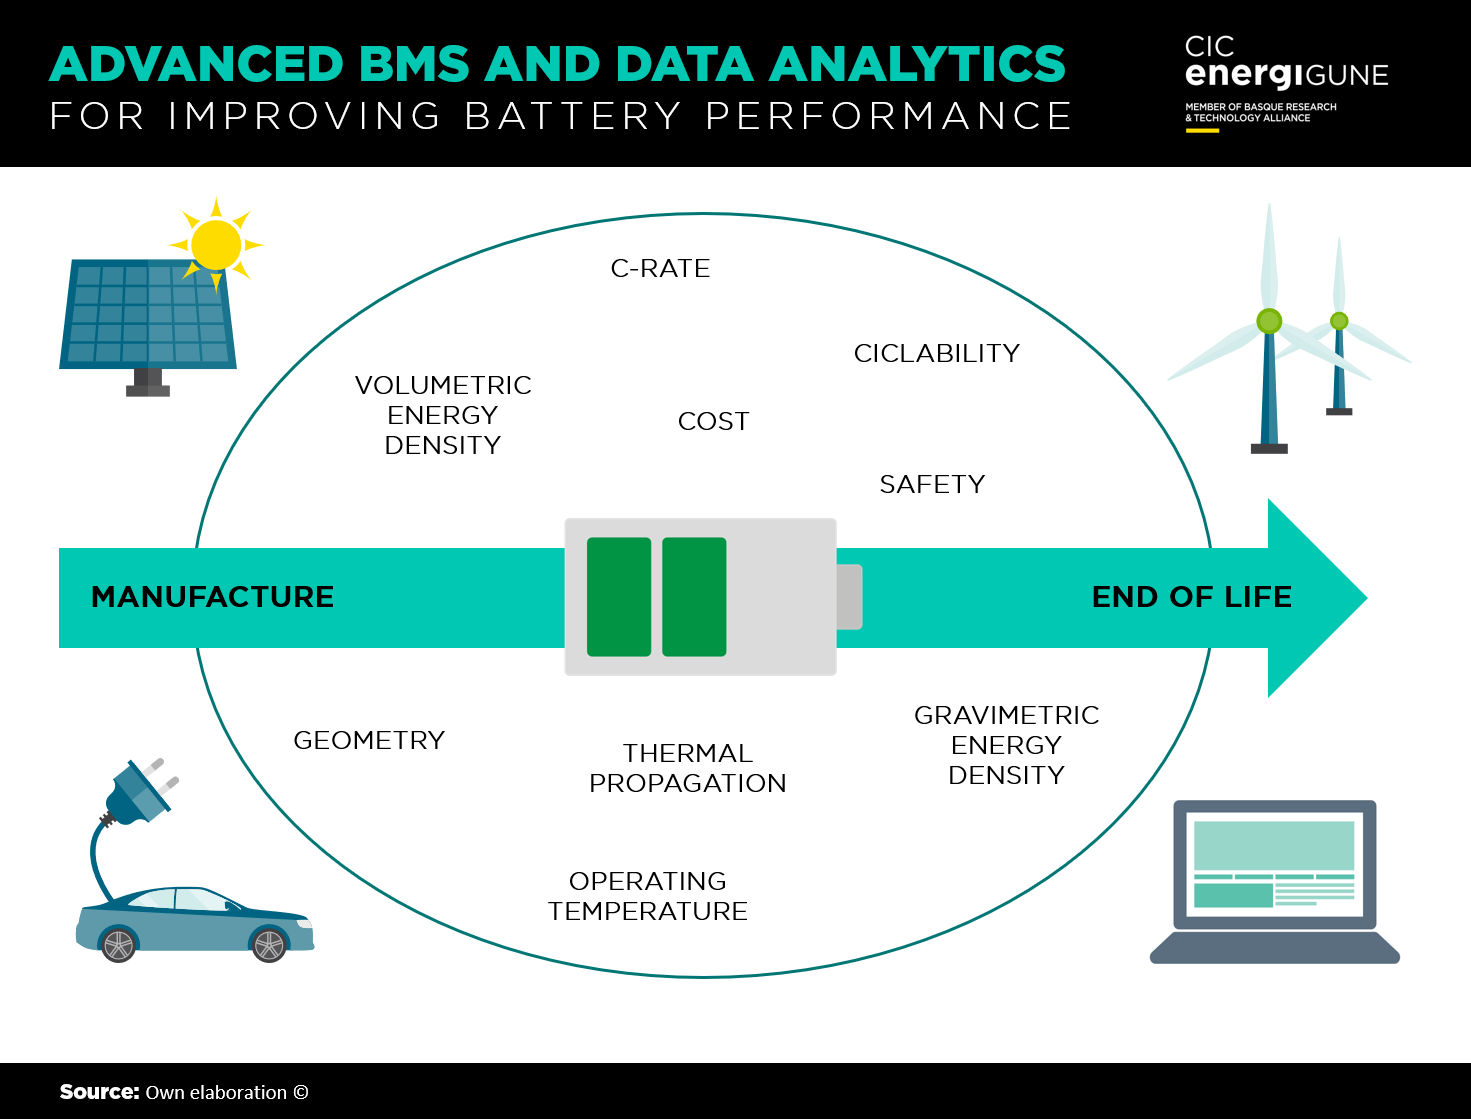 Advanced BMS and Data Analytics for improving battery performance. From manufacture to the end of its lifespan